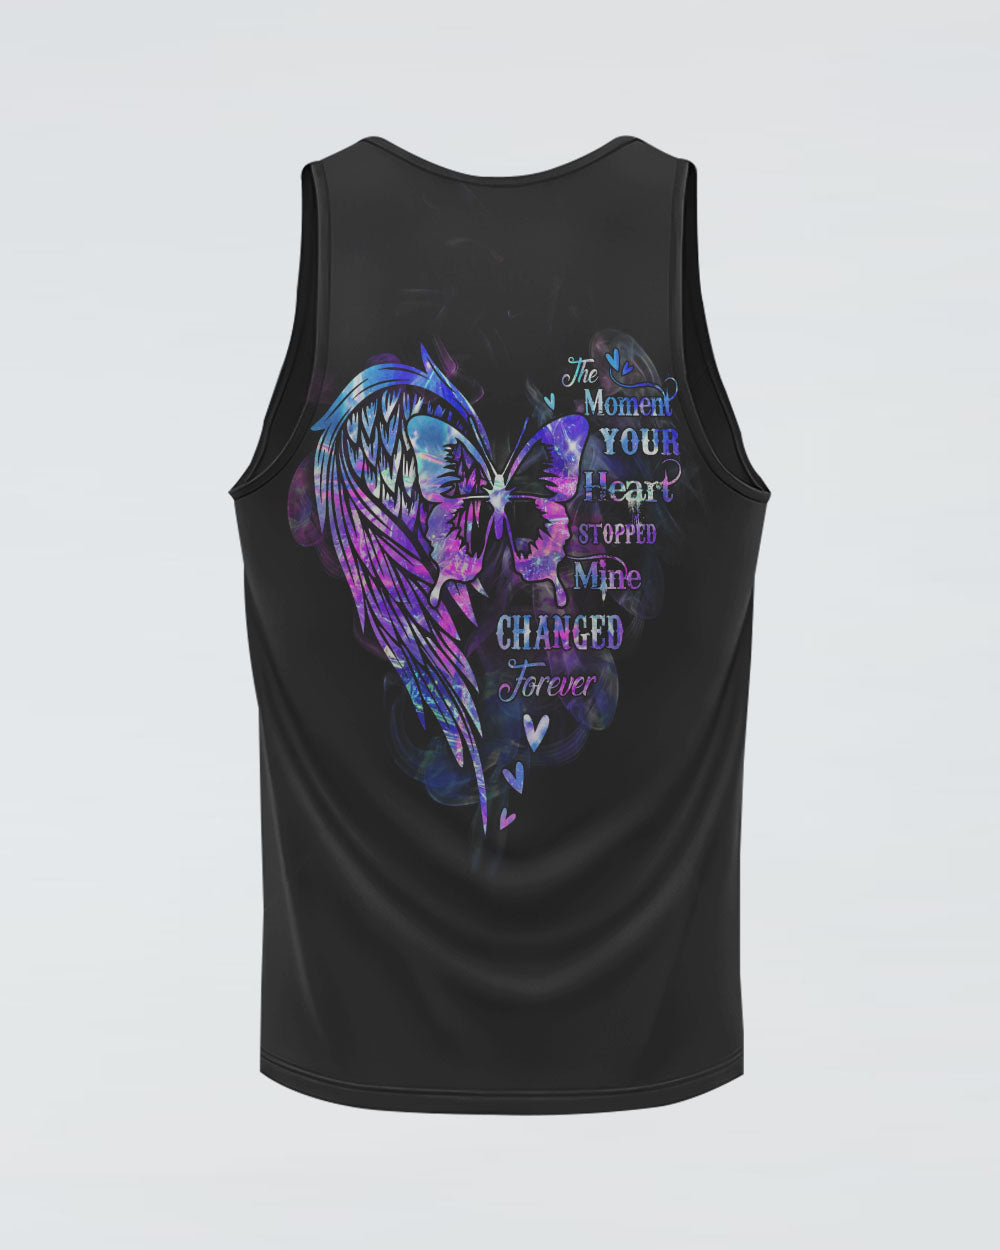 The Moment Your Heart Stopped Mine Changed Forever Women's Christian Tanks